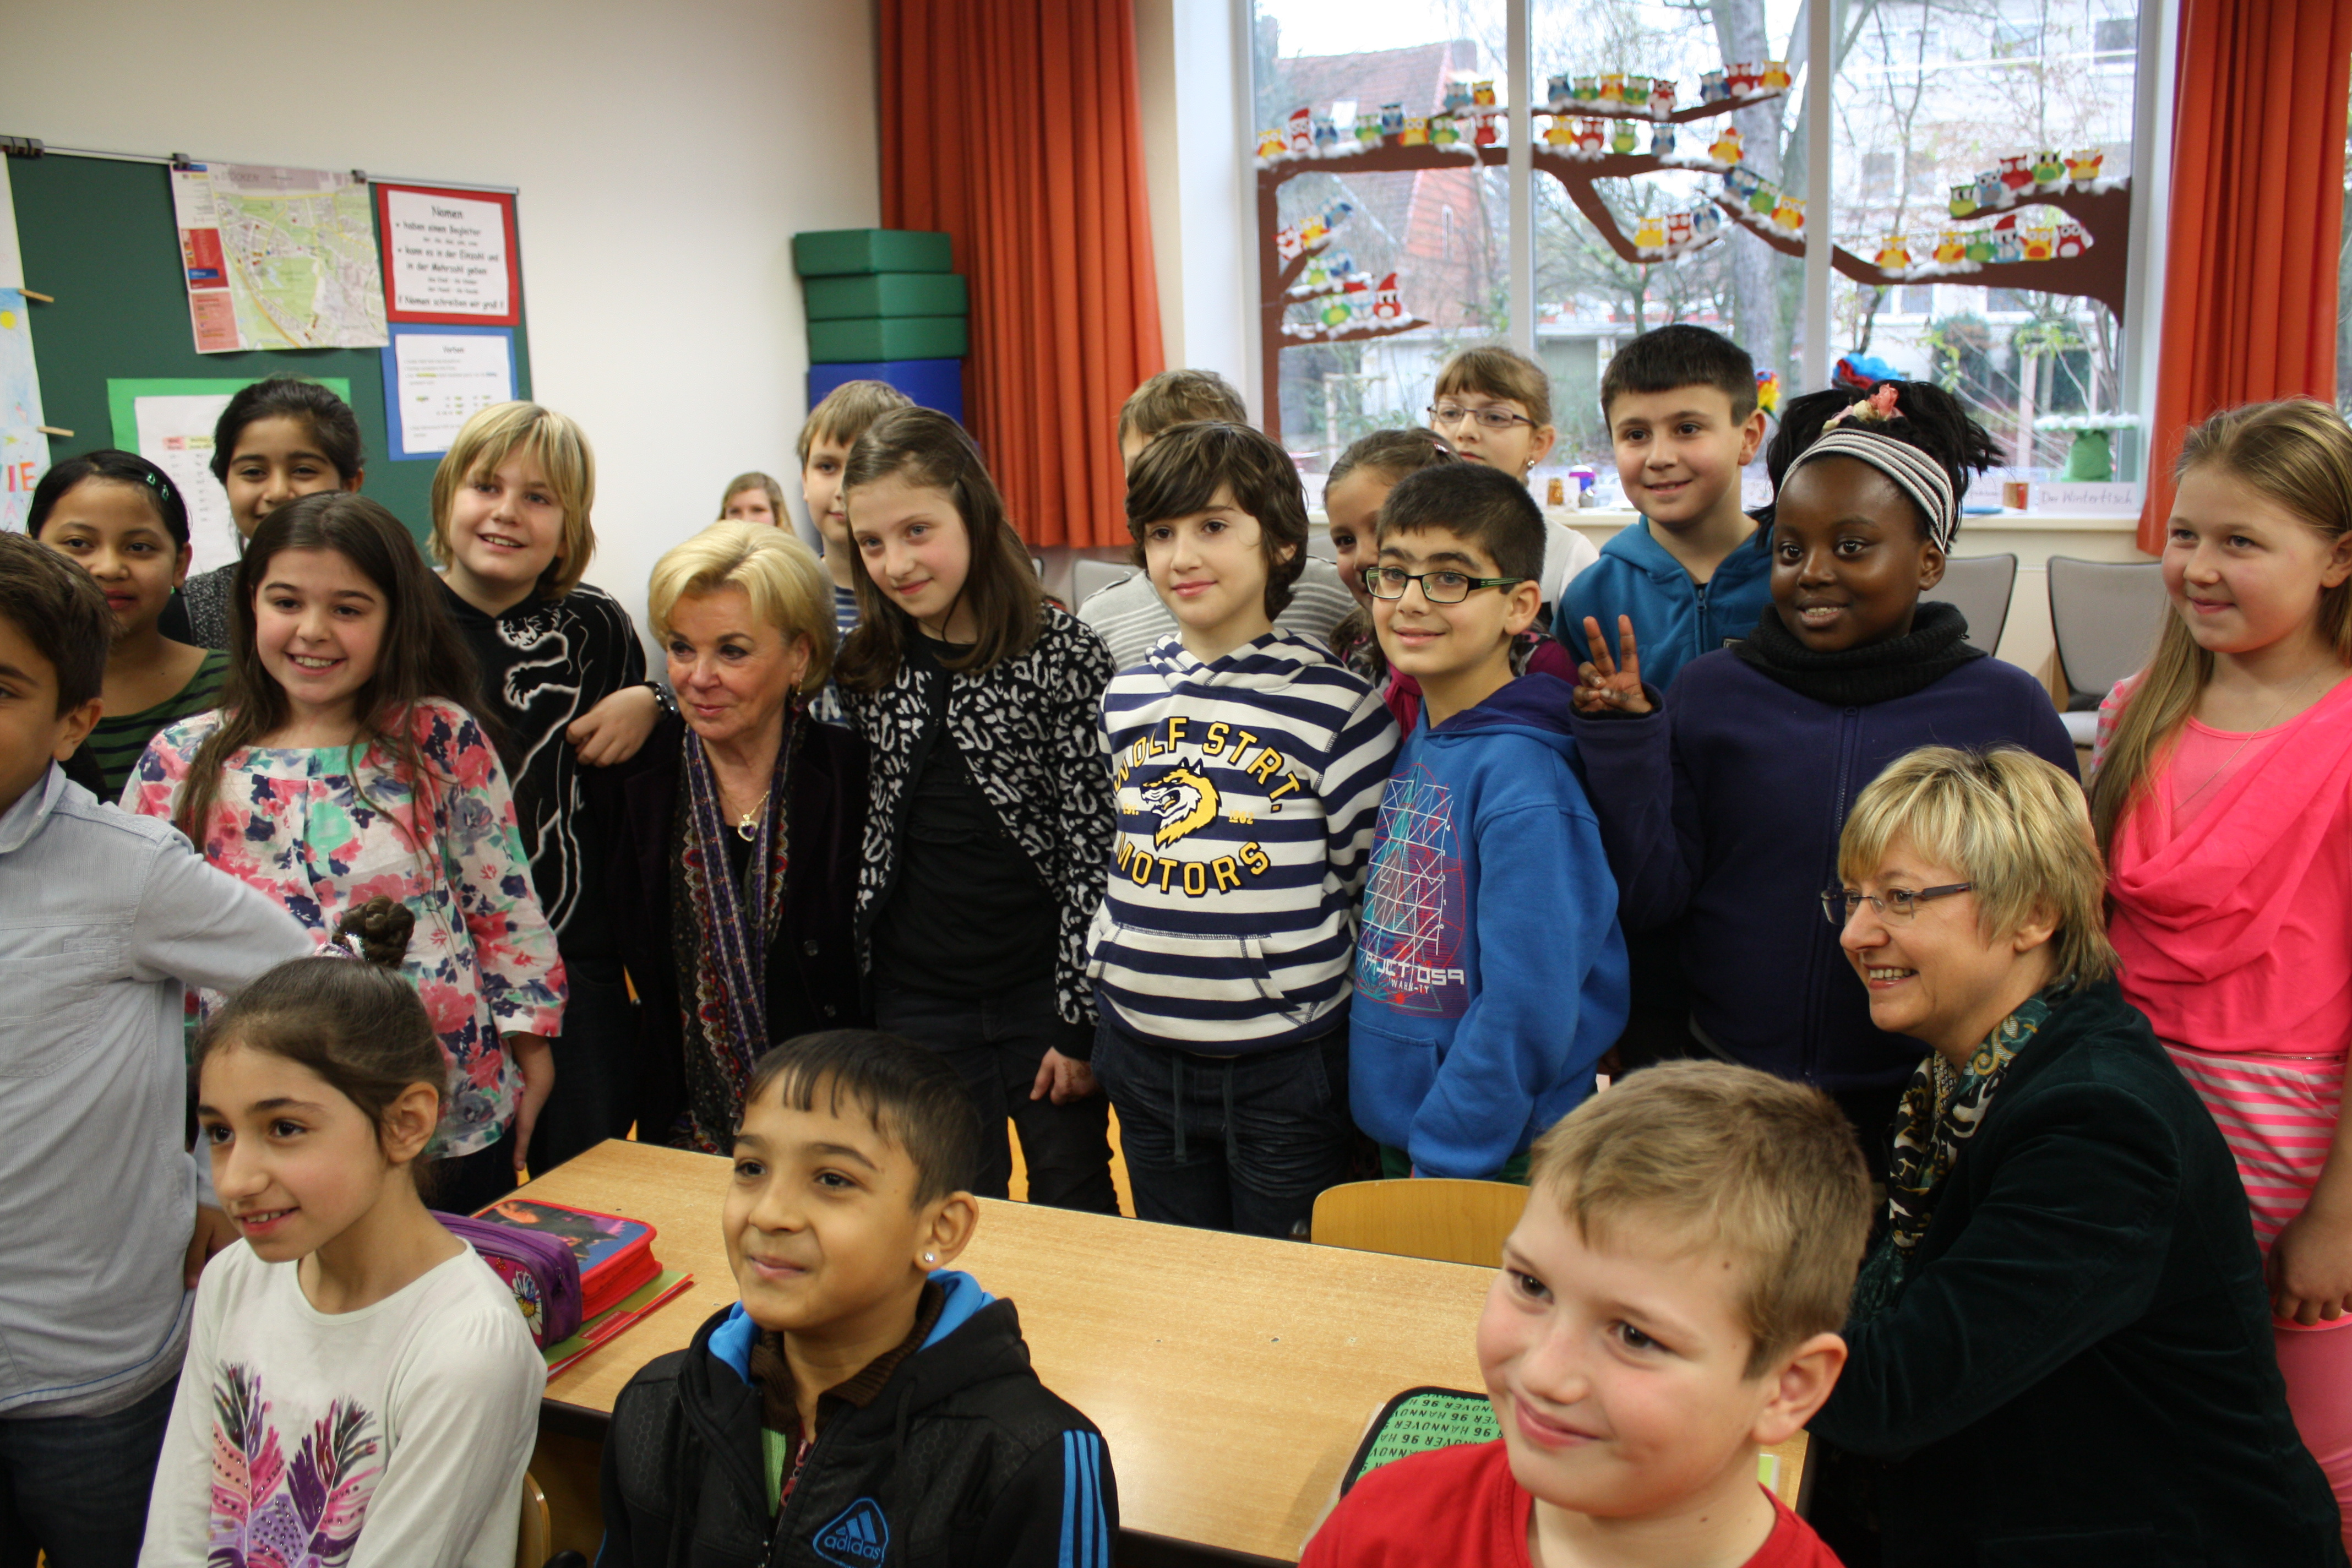 Liz Mohn surrounded by many students in a classroom